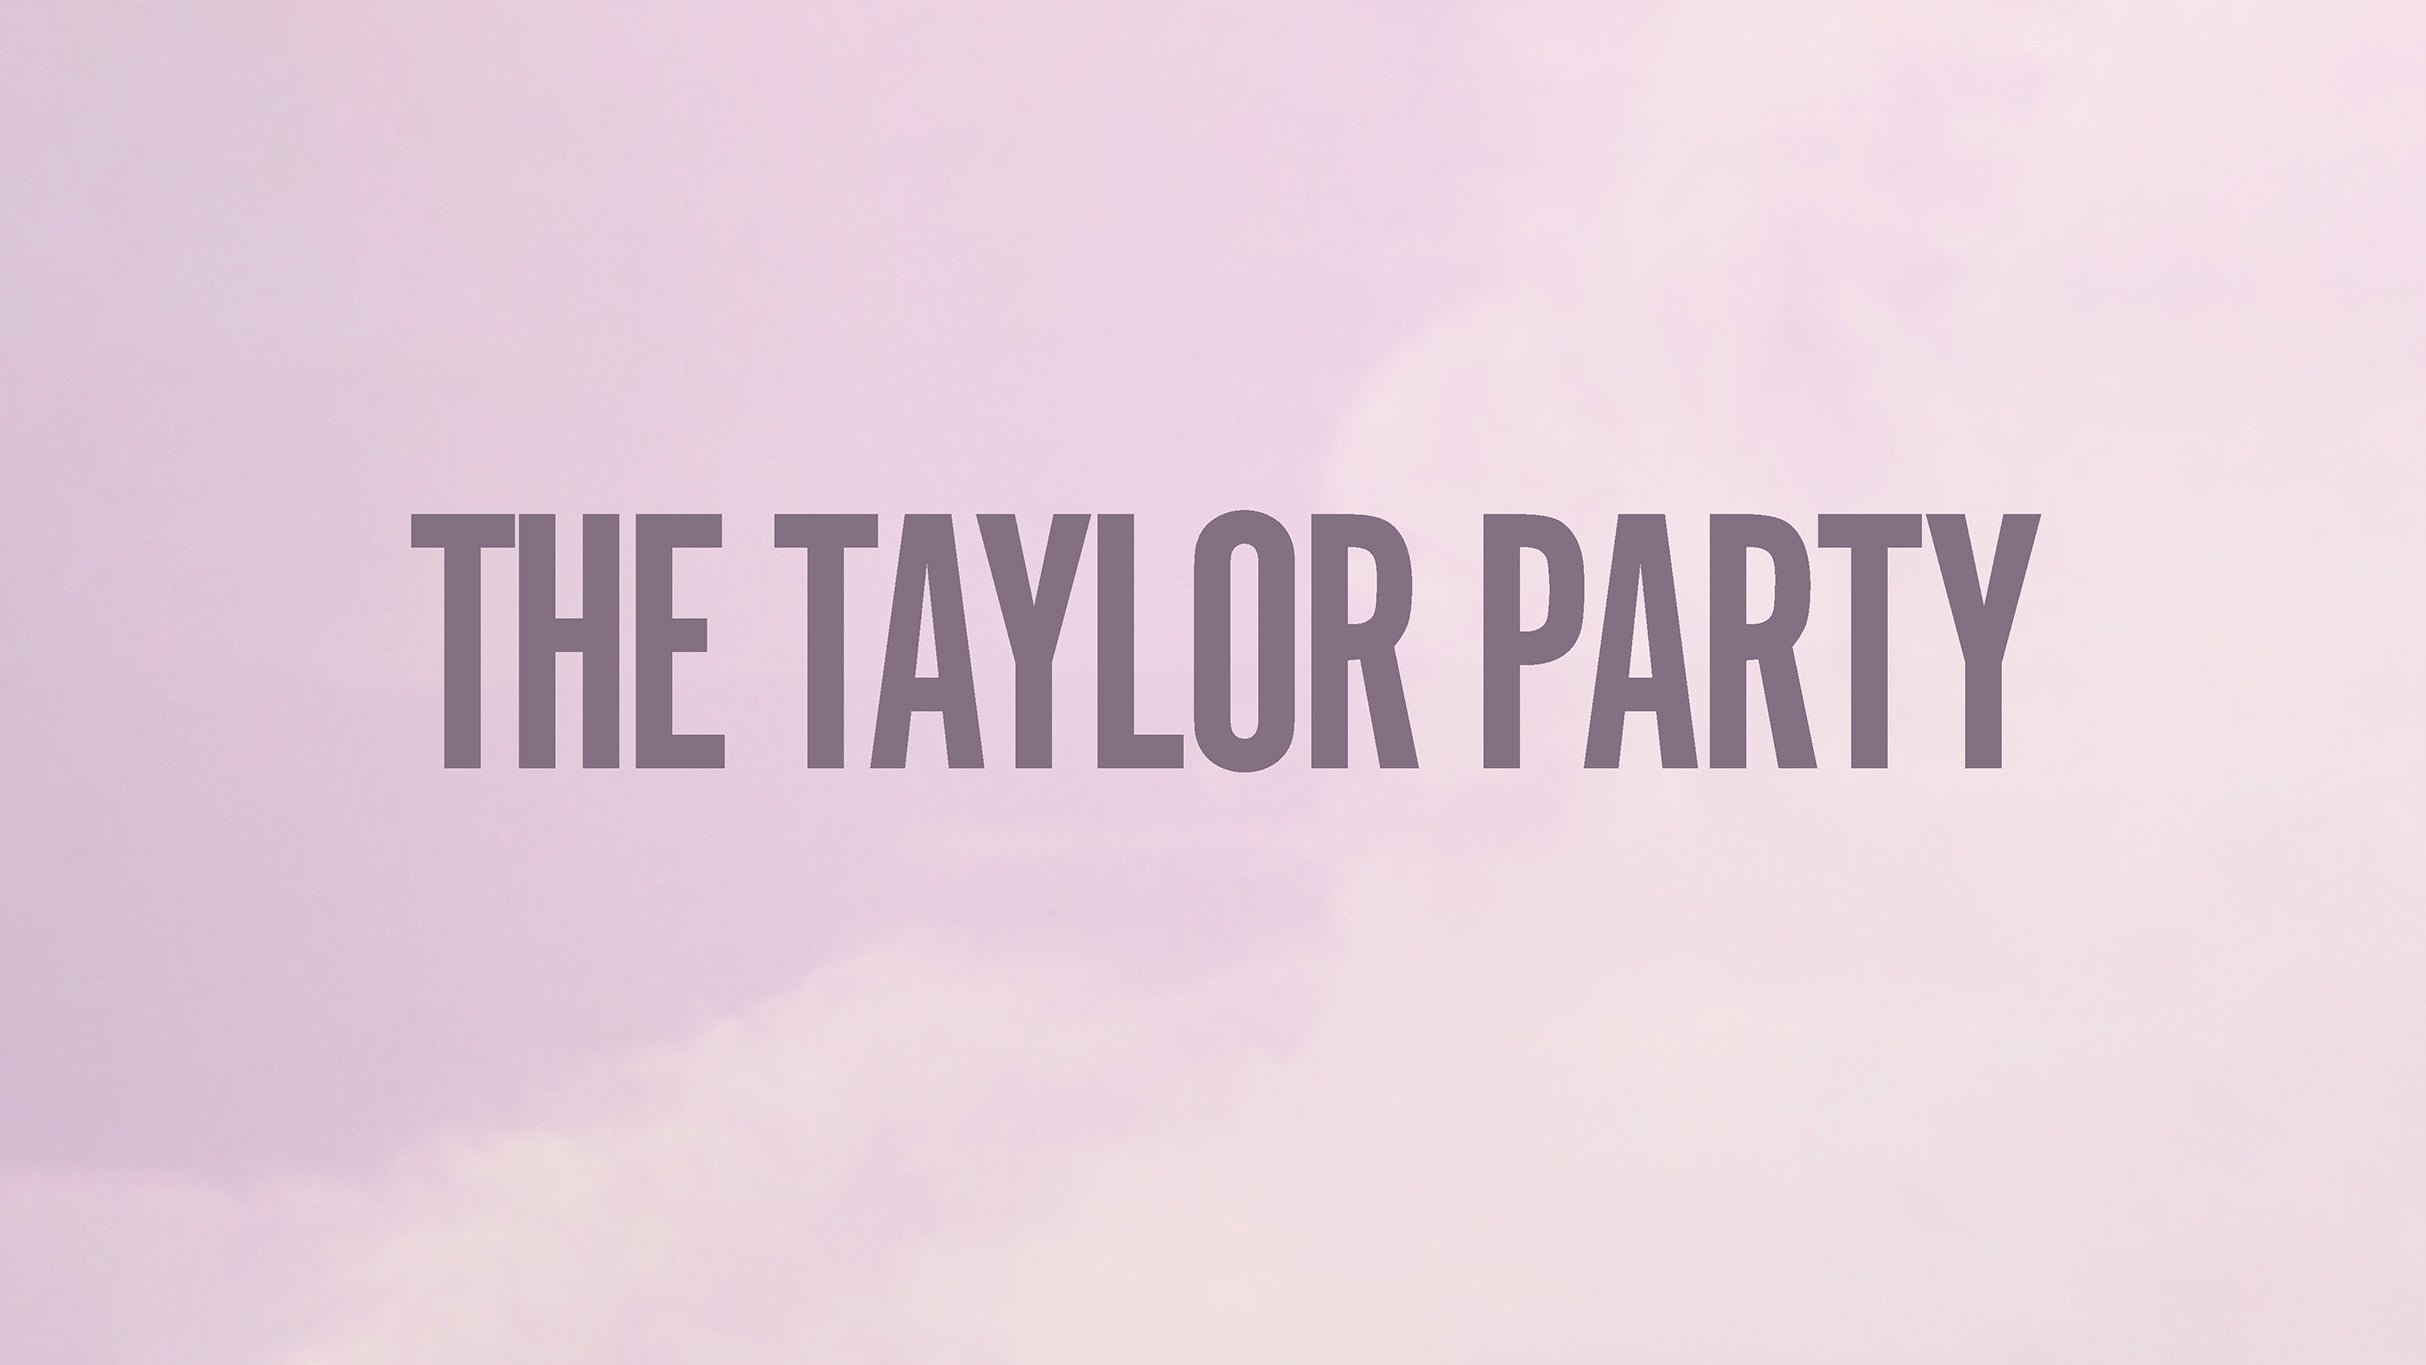 The Taylor Party: The TS Dance Party-18+ presale code for genuine tickets in Las Vegas